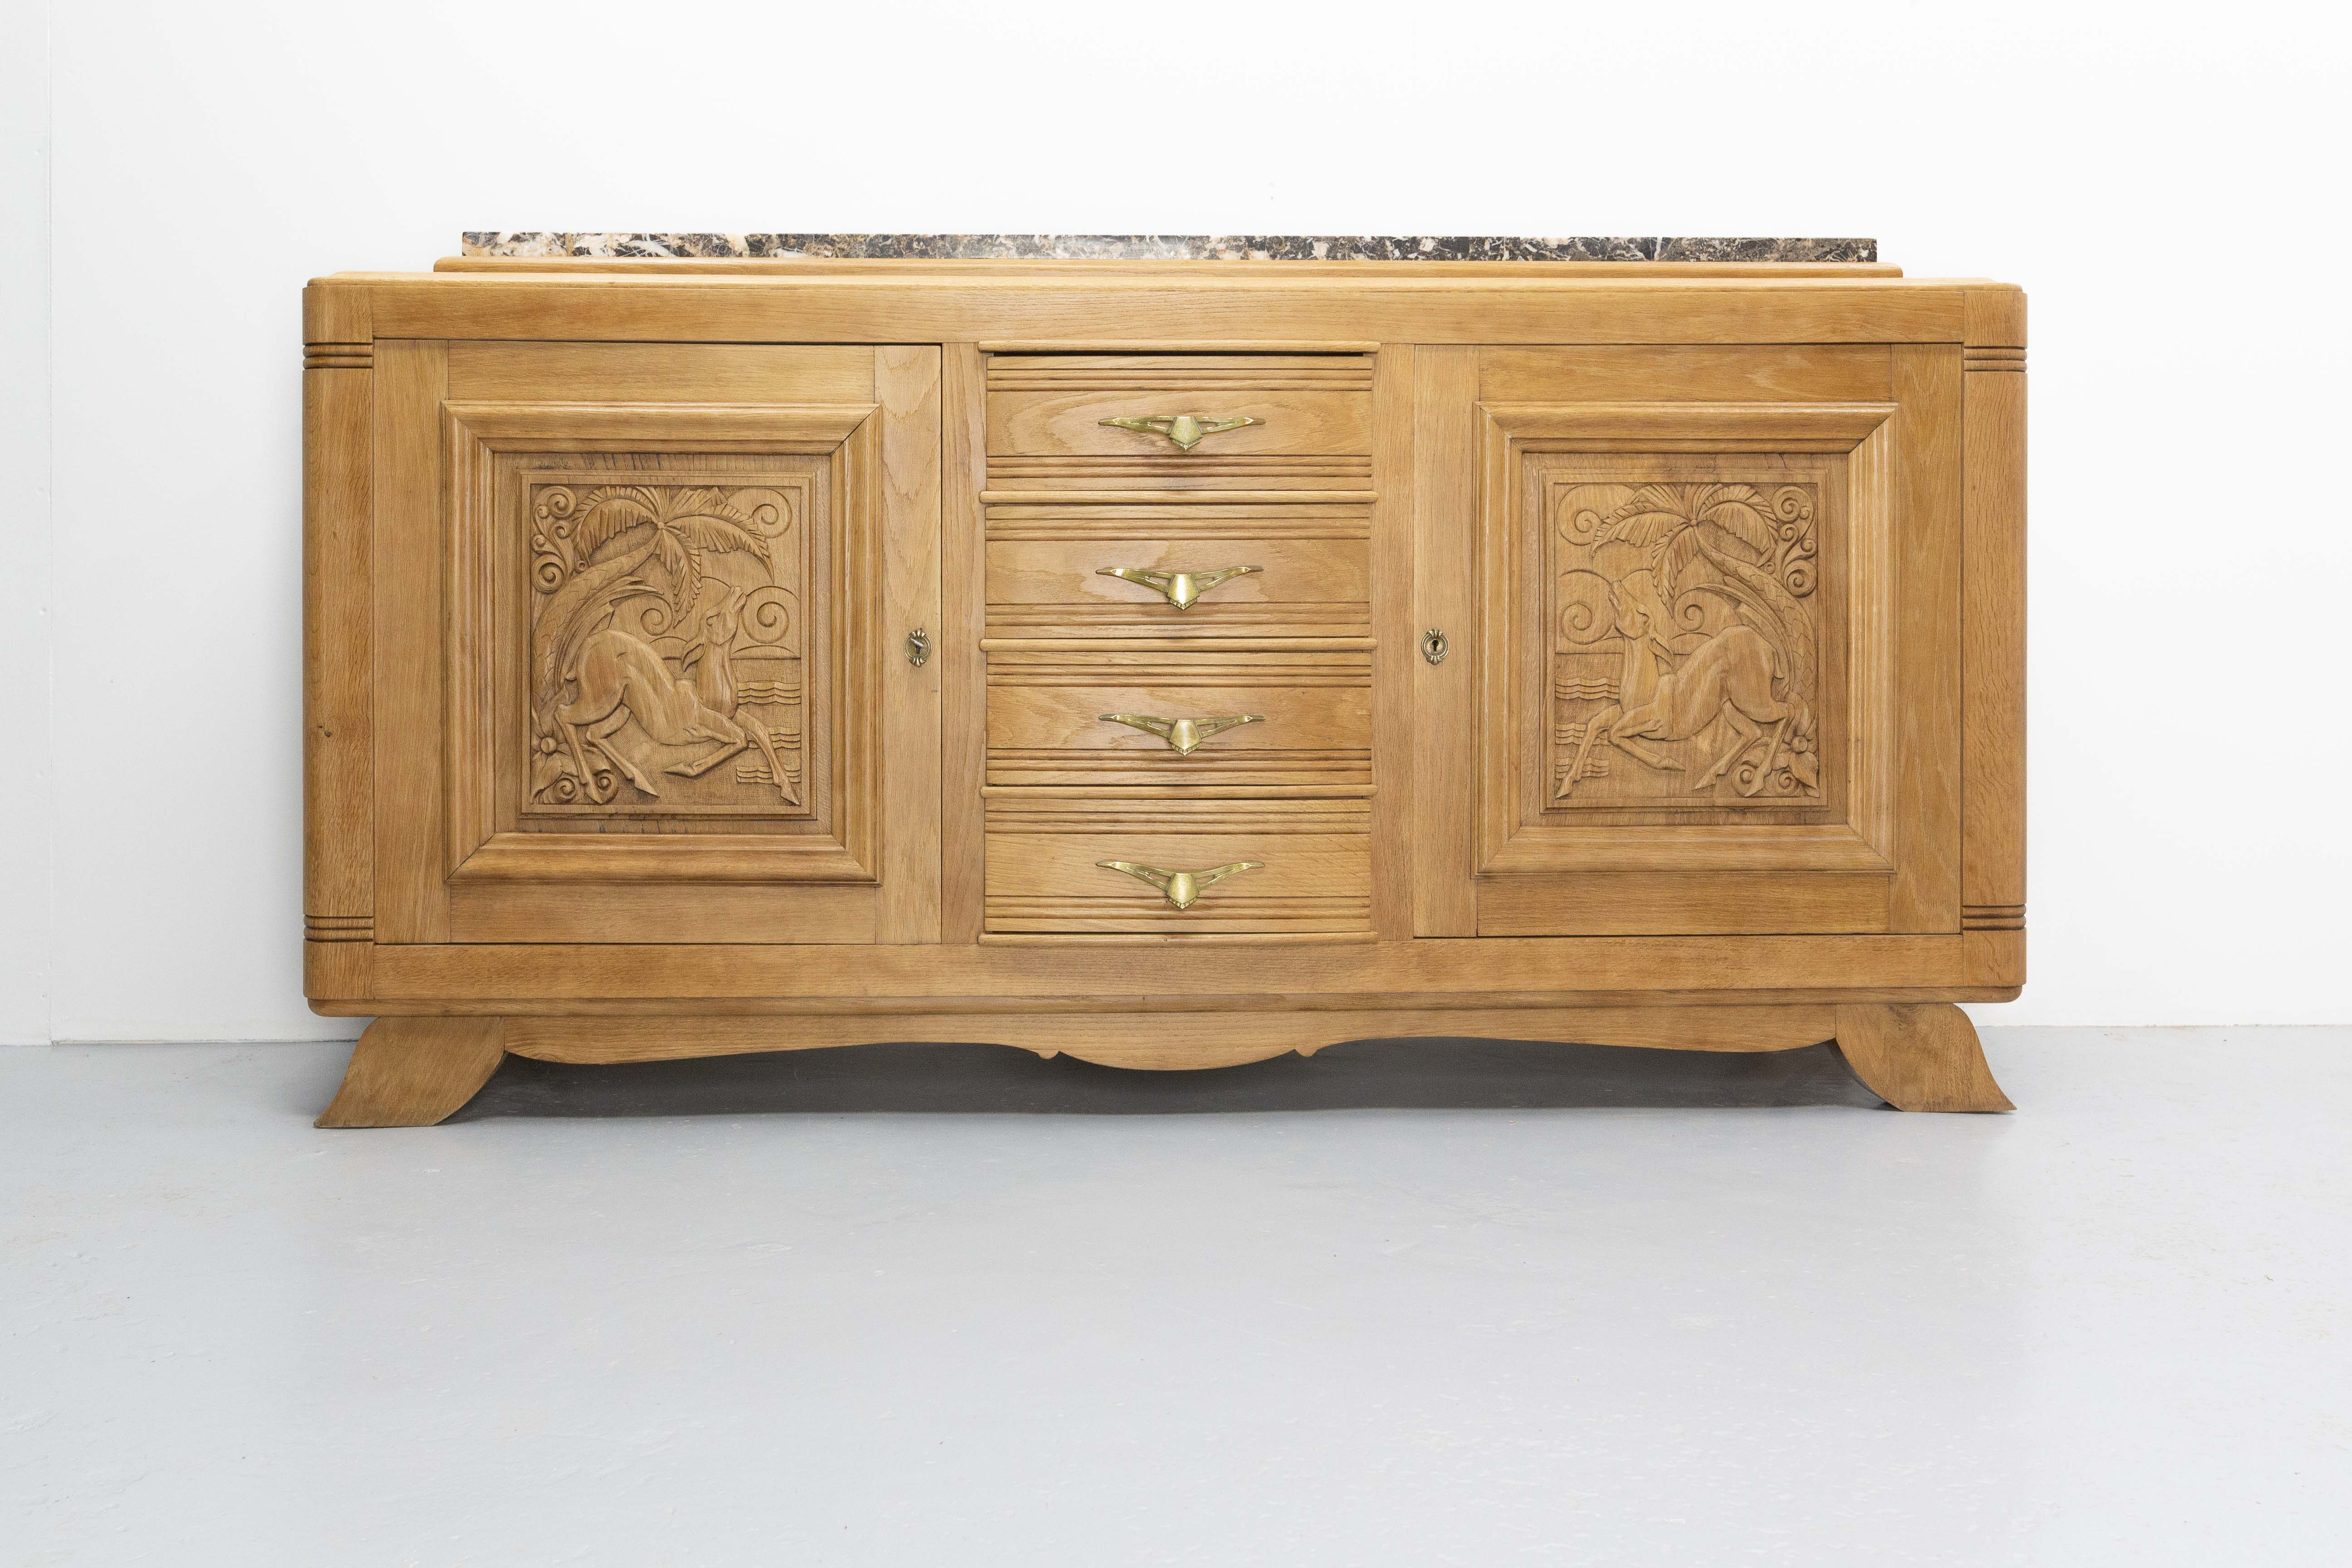 Massive Oak and Marble Top Antelopes Credenza Sideboard French Buffet, C. 1940 For Sale